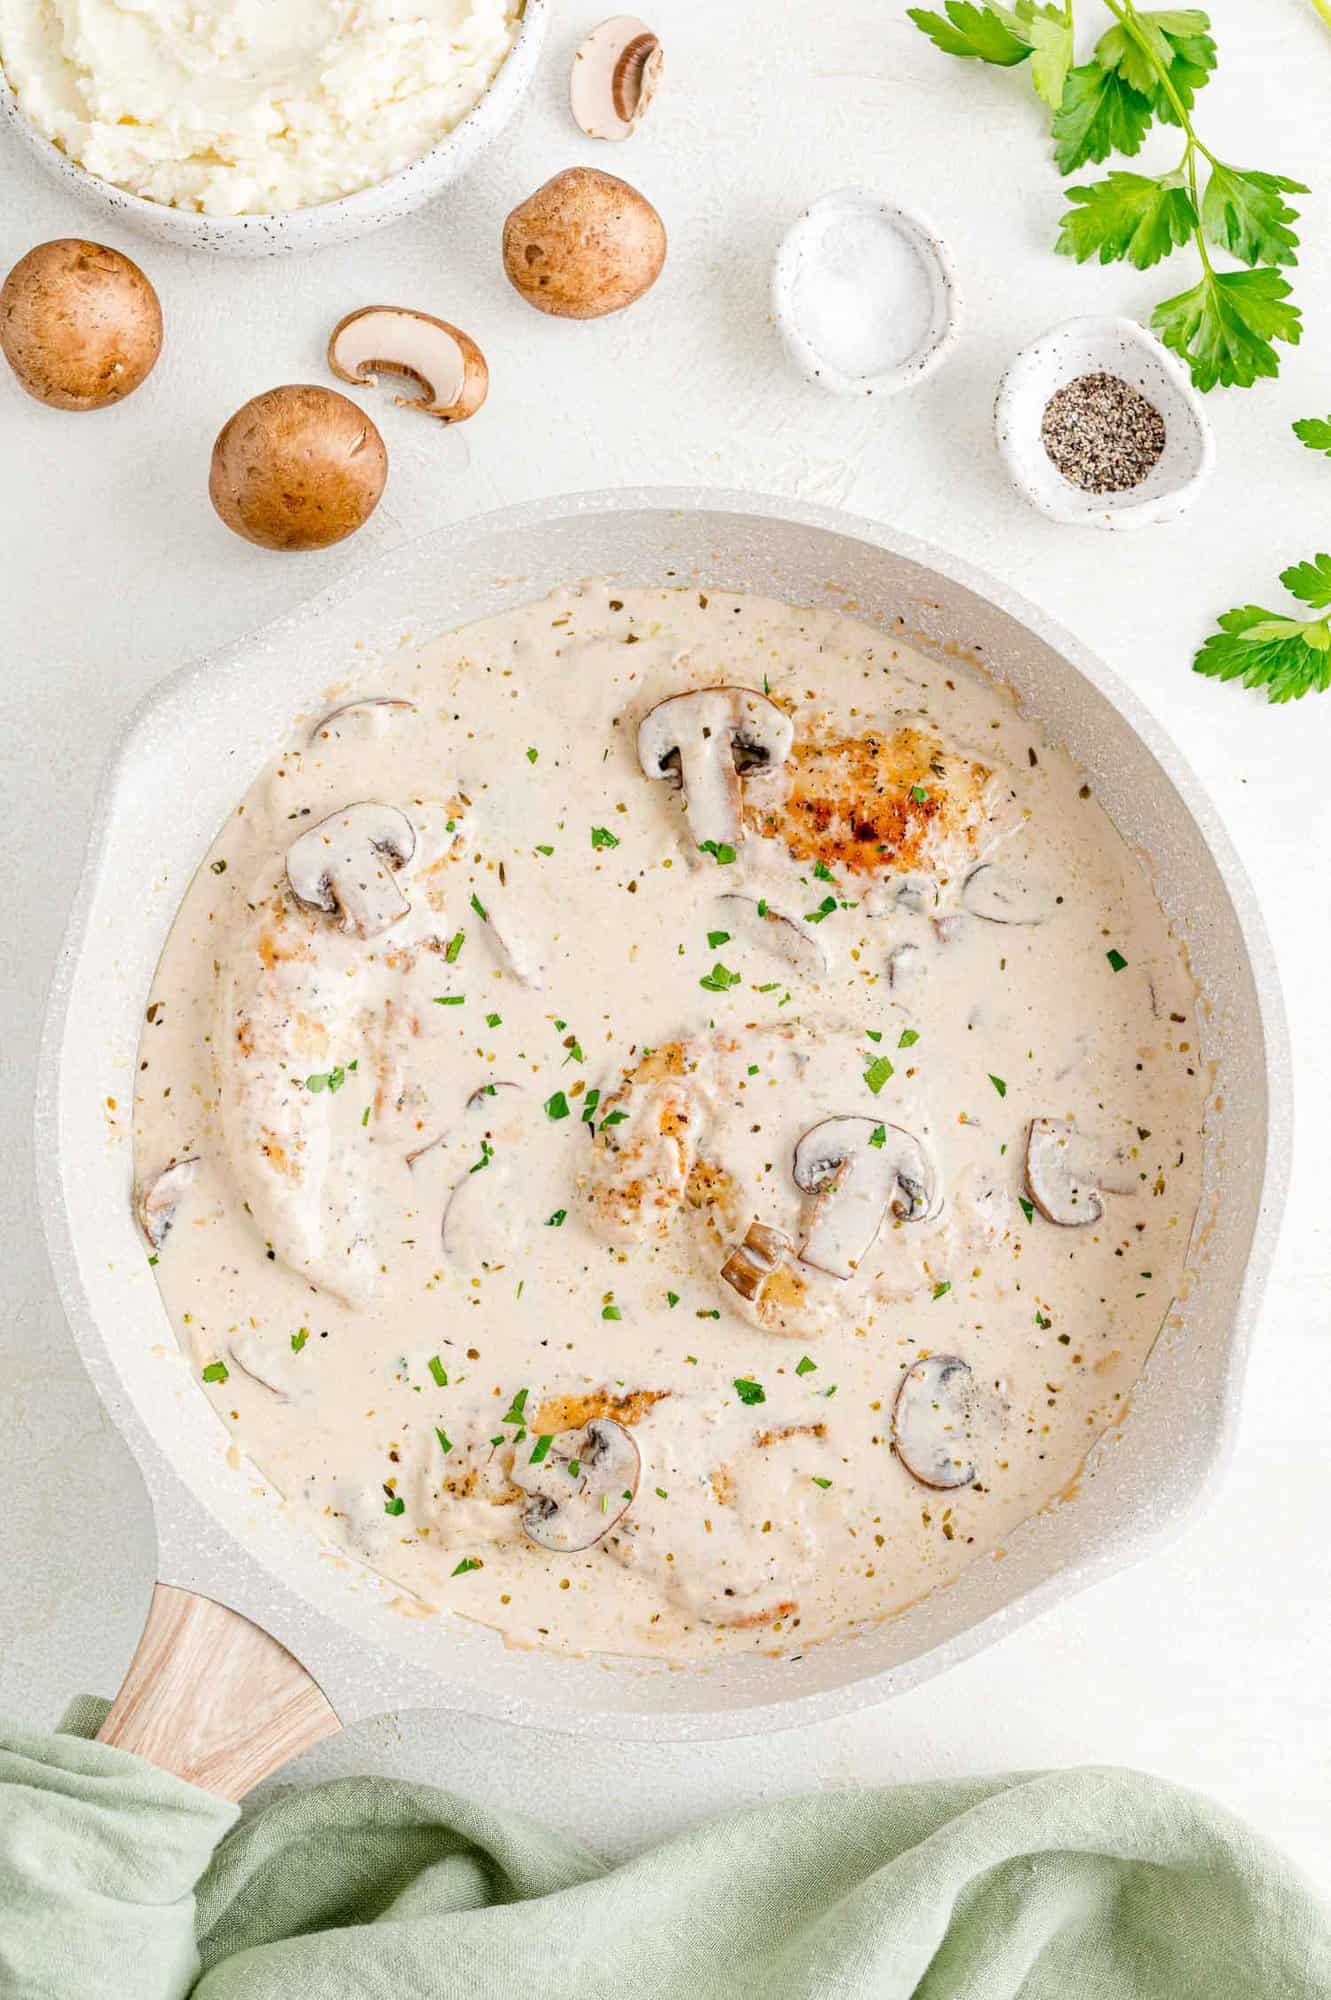 Pan-fried chicken cutlets in a skillet with mushrooms in creamy marsala sauce.